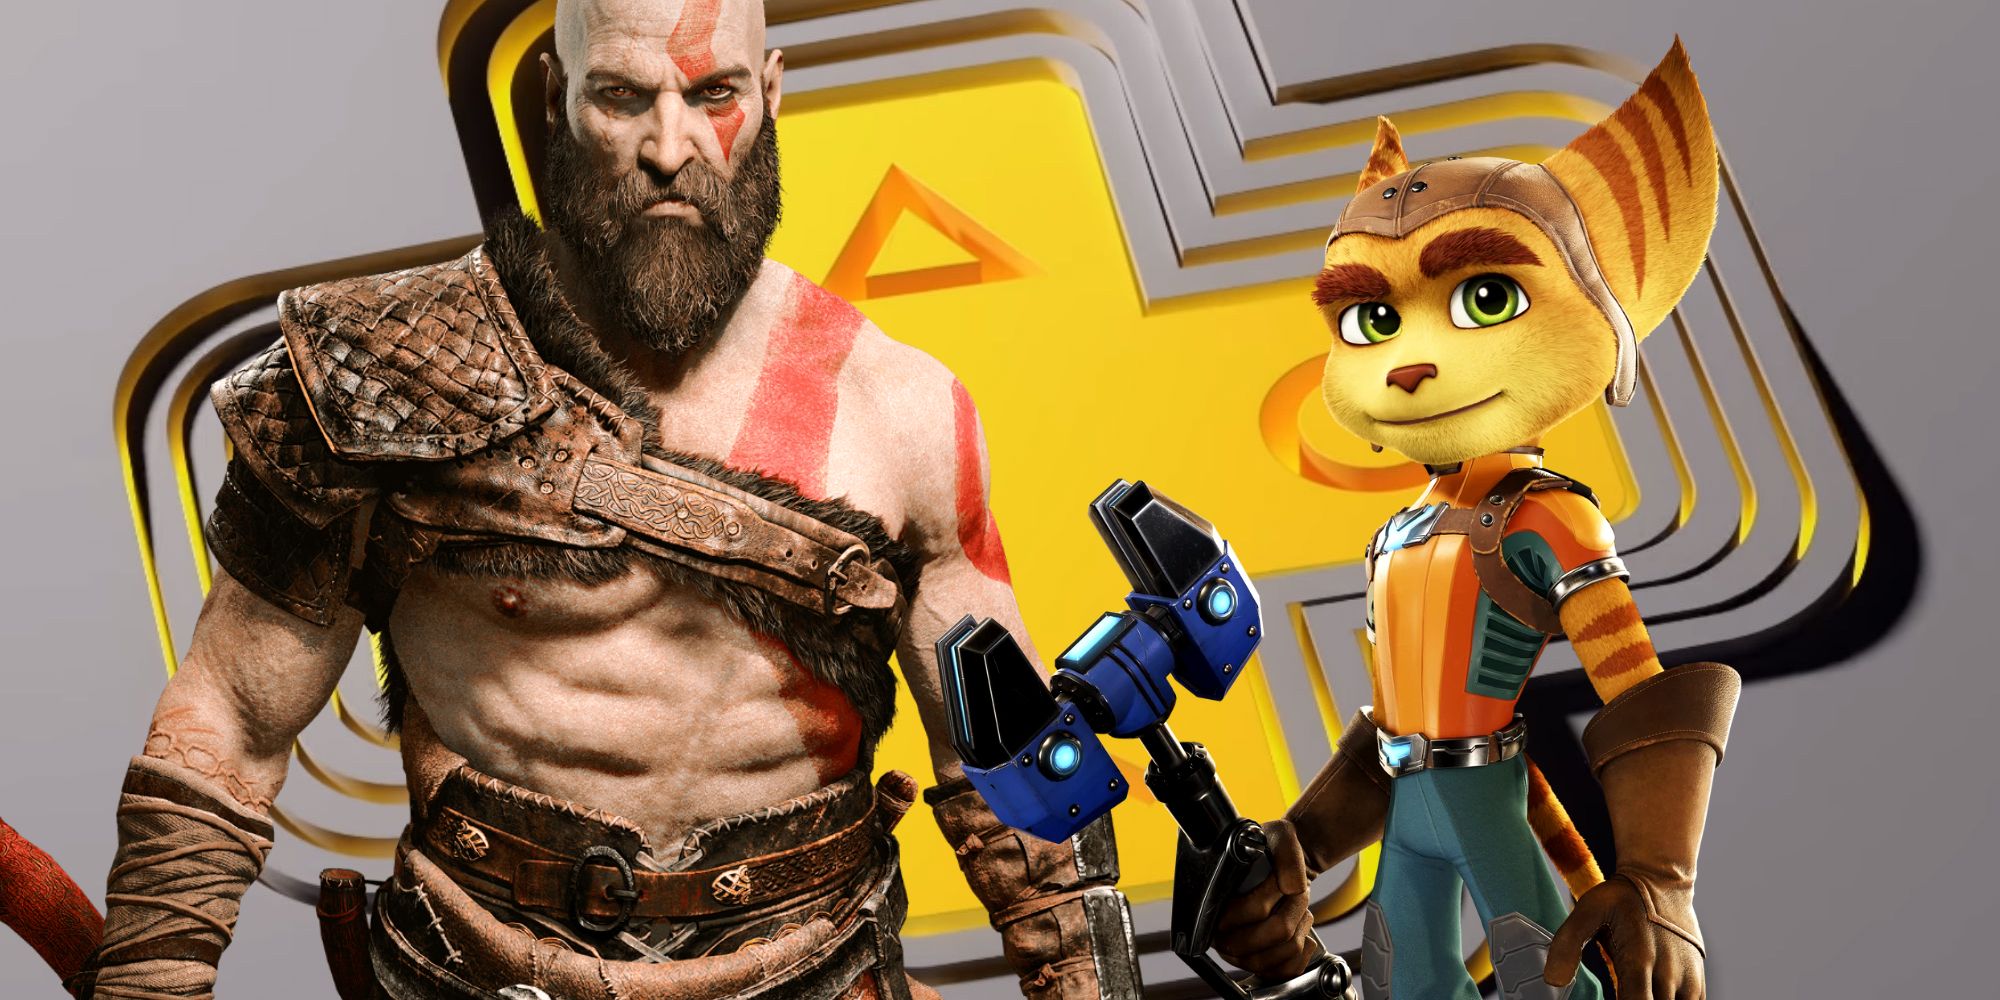 Kratos from God of War and Ratchet from Ratchet and Clank in front of the yellow PlayStation Plus logo on a silver background.